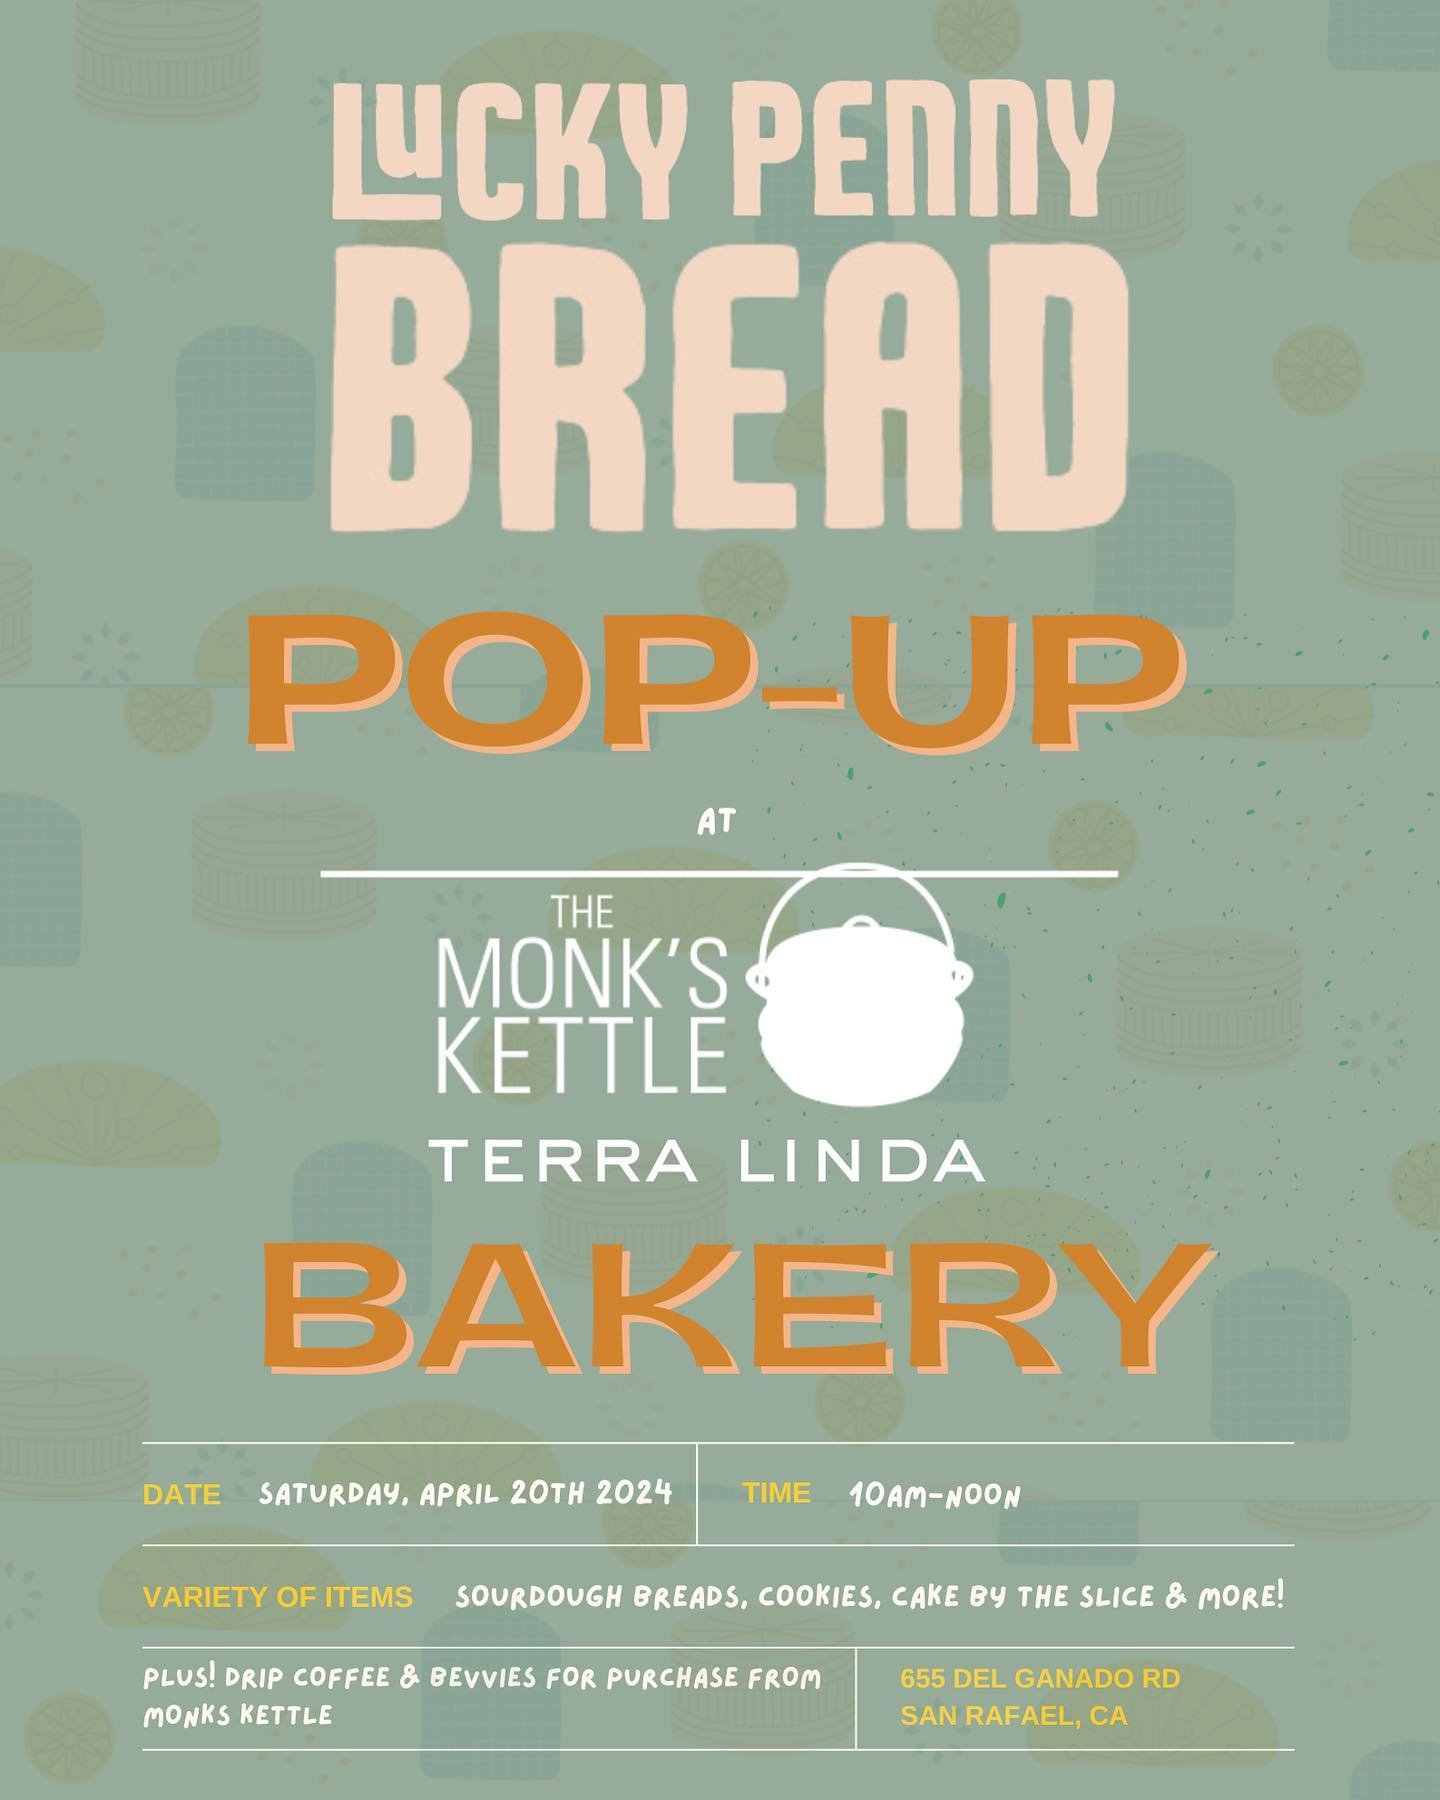 Join us for a pop up @monkskettle_tl this Saturday April 20th from 10am-Noon (or sold out)

Lots of goodies planned (new cake slice!!) and Monks will have drip coffee and other beverages for purchase and limited seating on site 🤩🤩

See you then!?